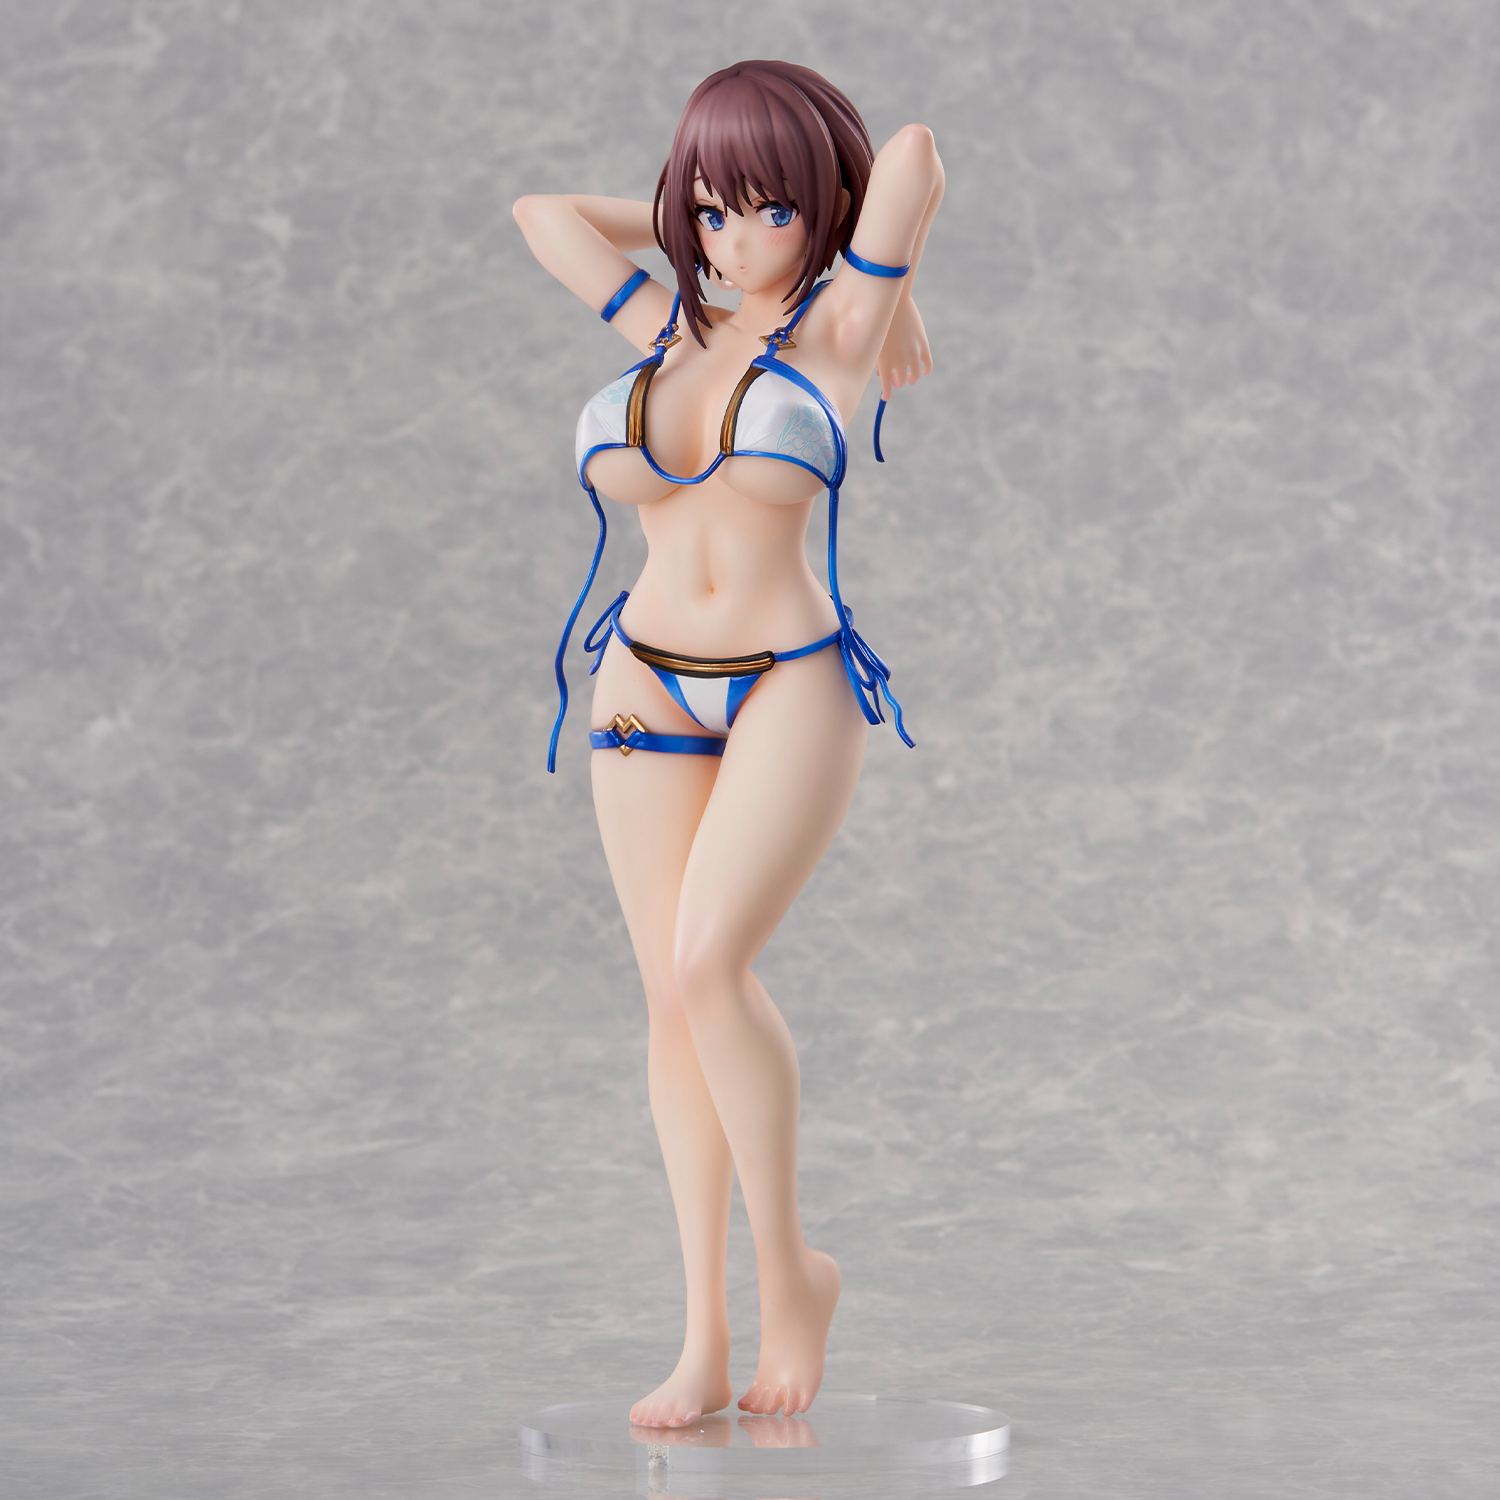 Original Character 1/6 Scale Pre-Painted Figure: Hitoyo-chan Swimwear Ver. illustration by Bonnie Eighteen